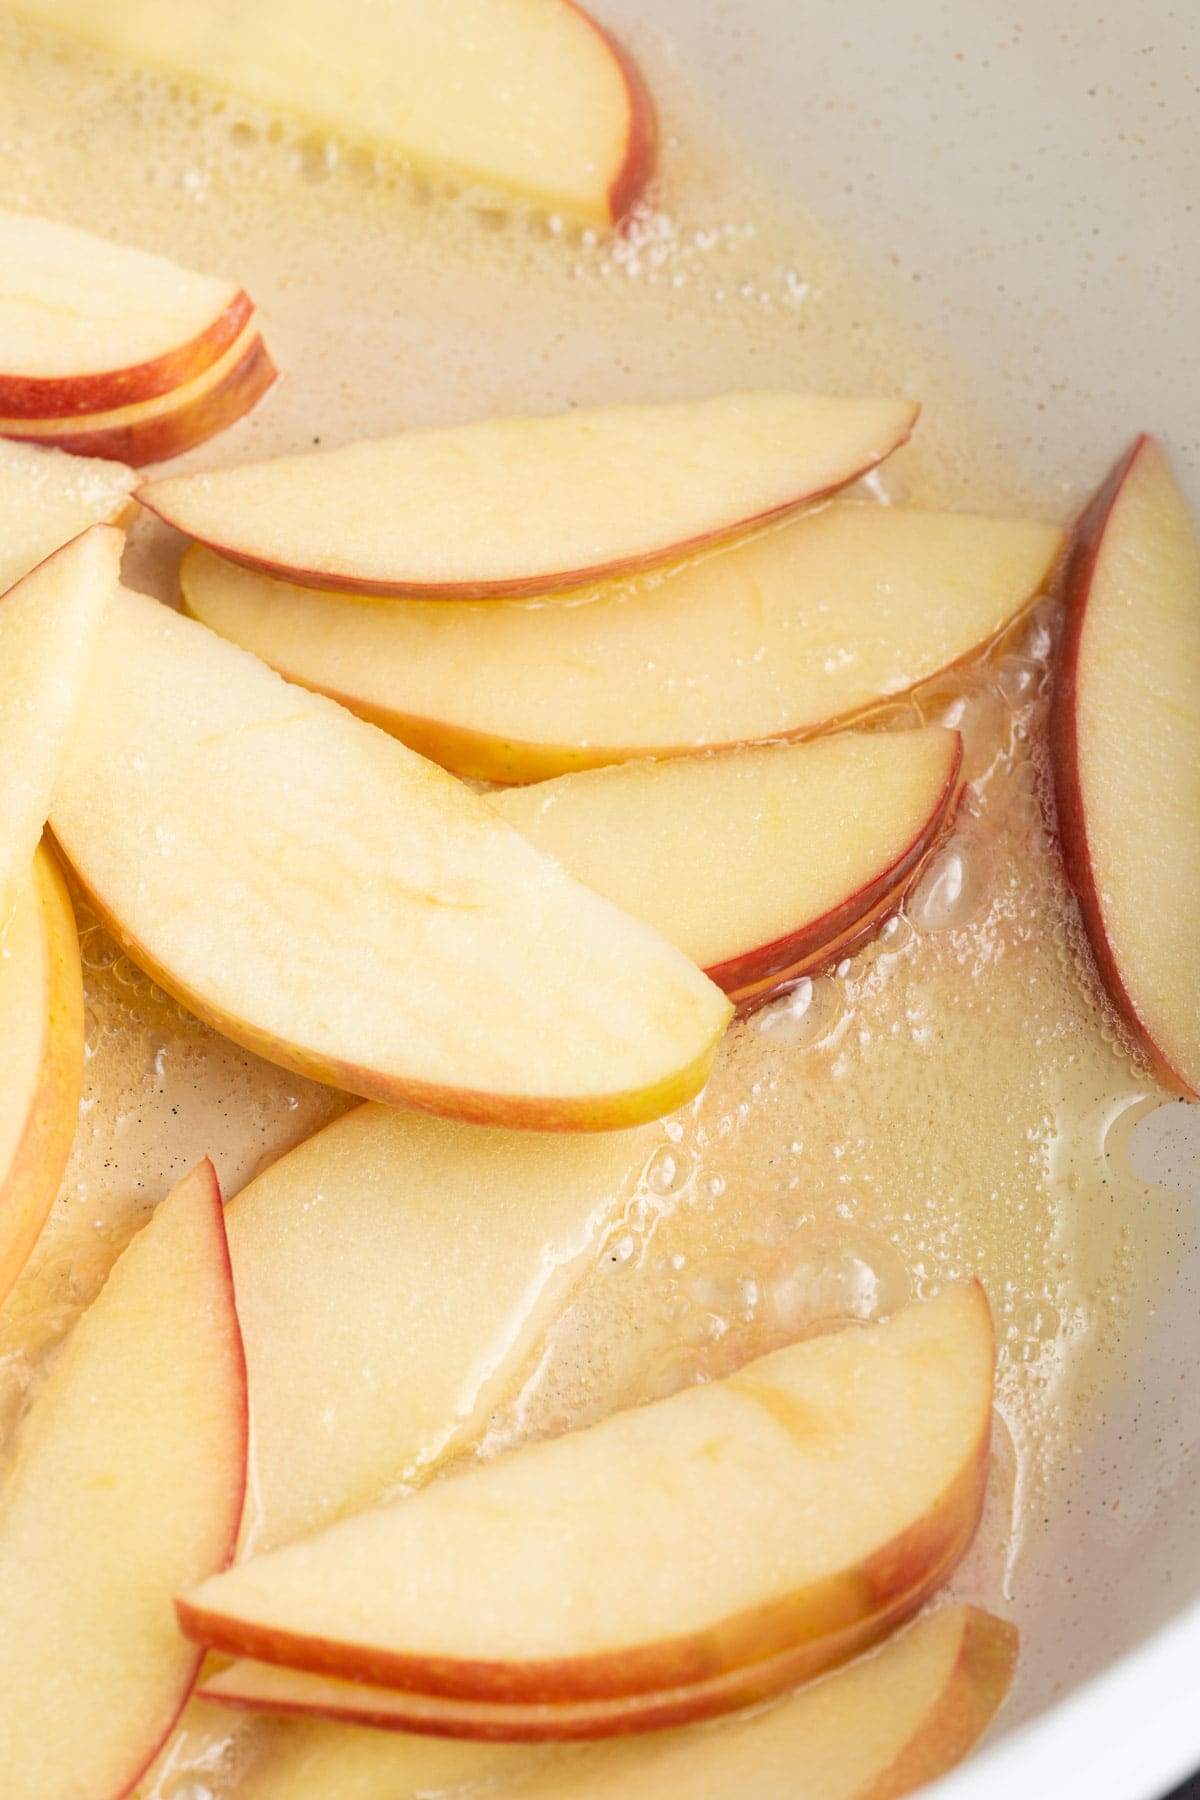 Apples cooking in a pan with sizzling butter. 